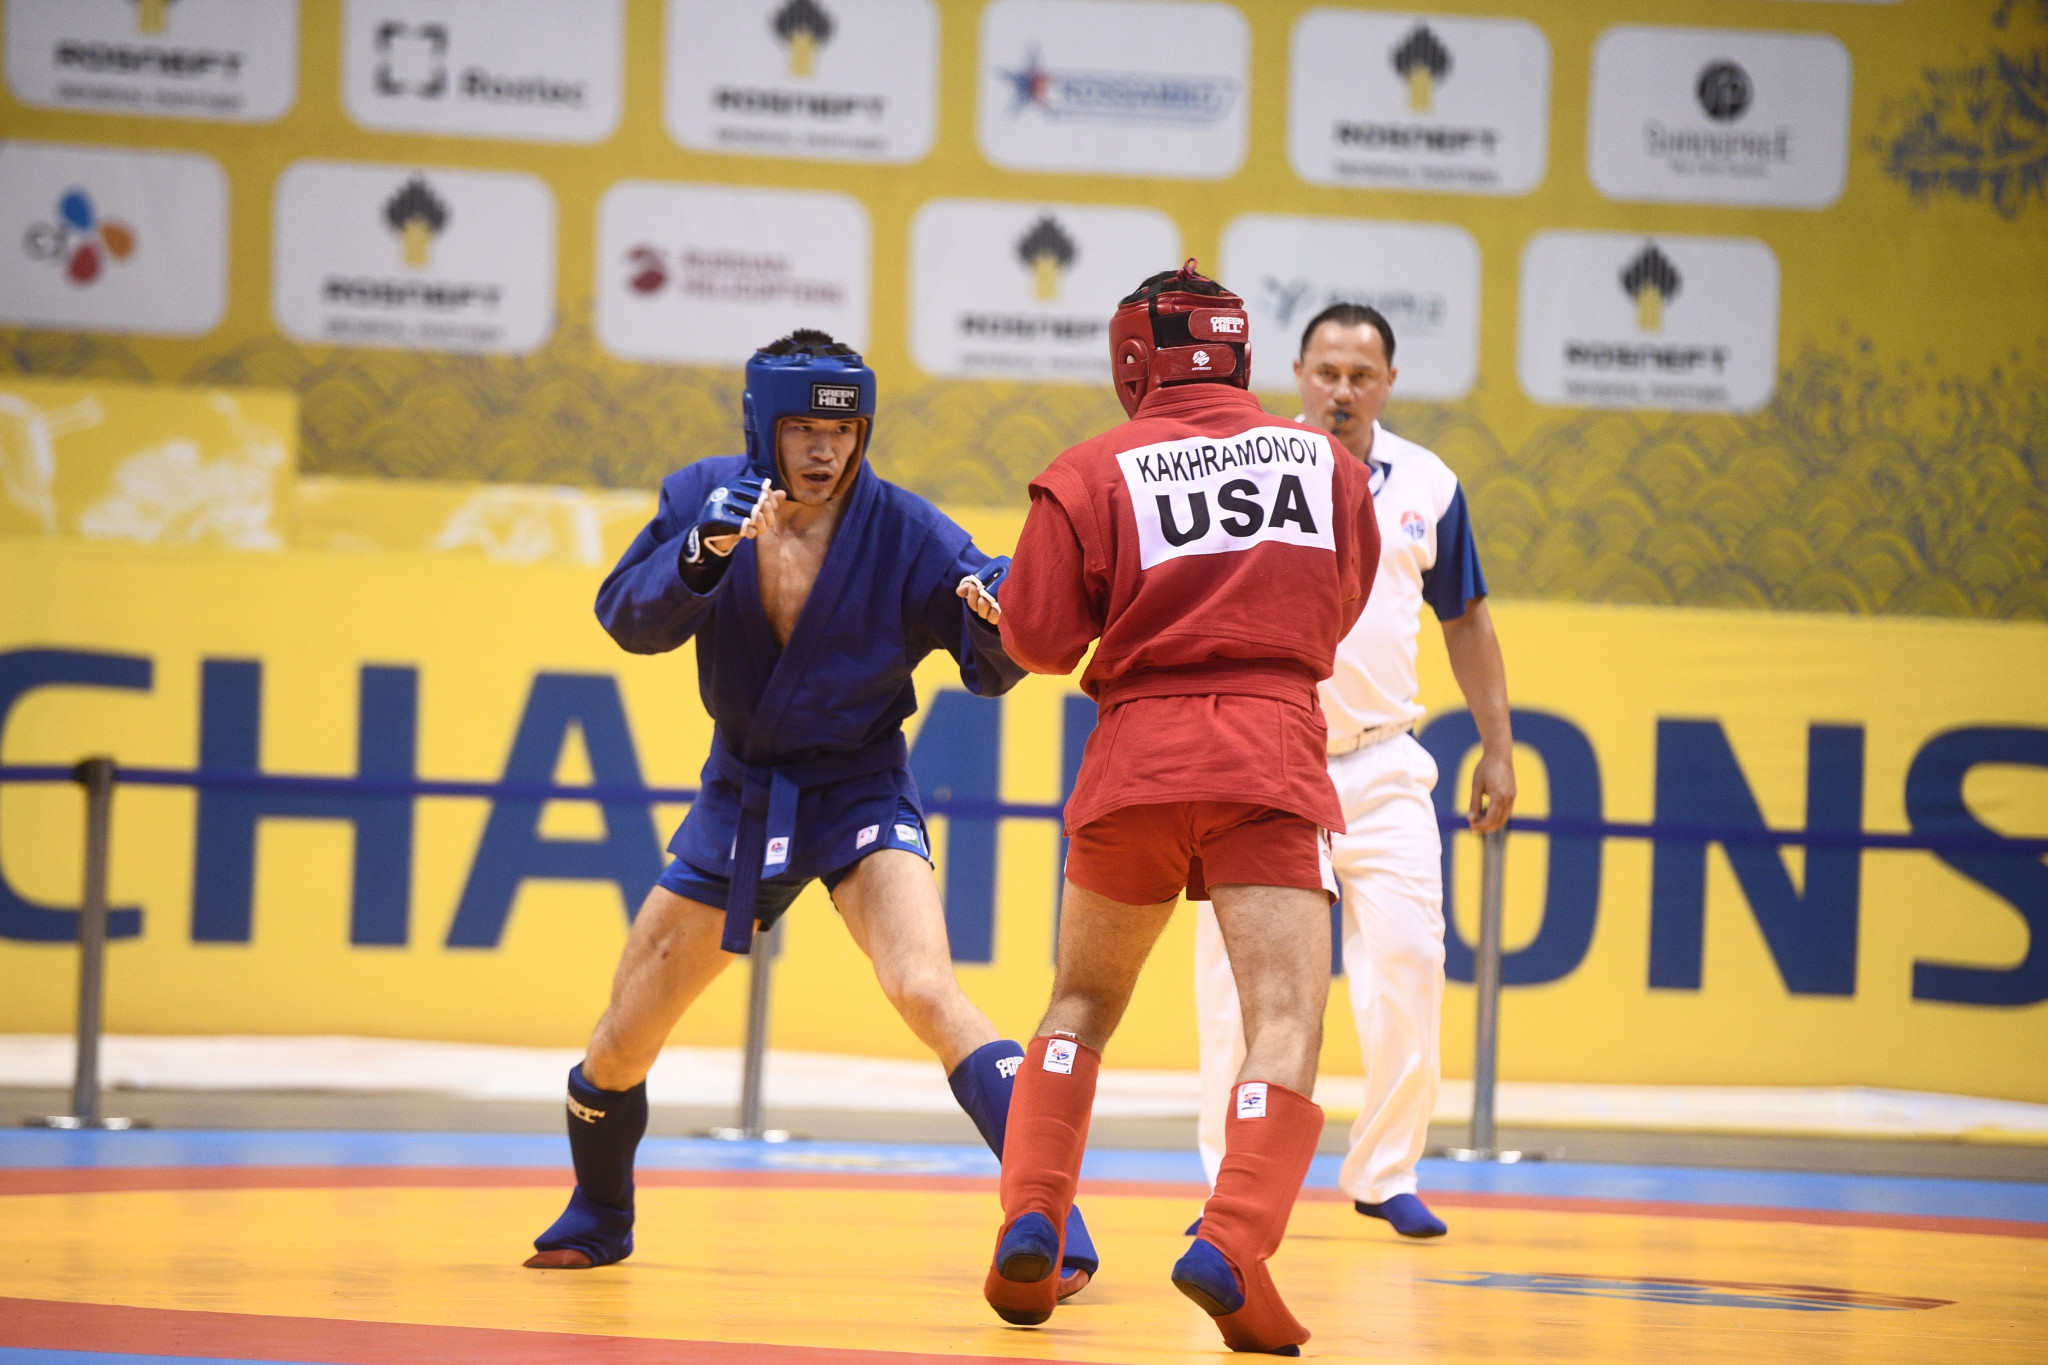 Saidyokub Kahkramonov won the first bronze medal for the United States at the event ©FIAS 